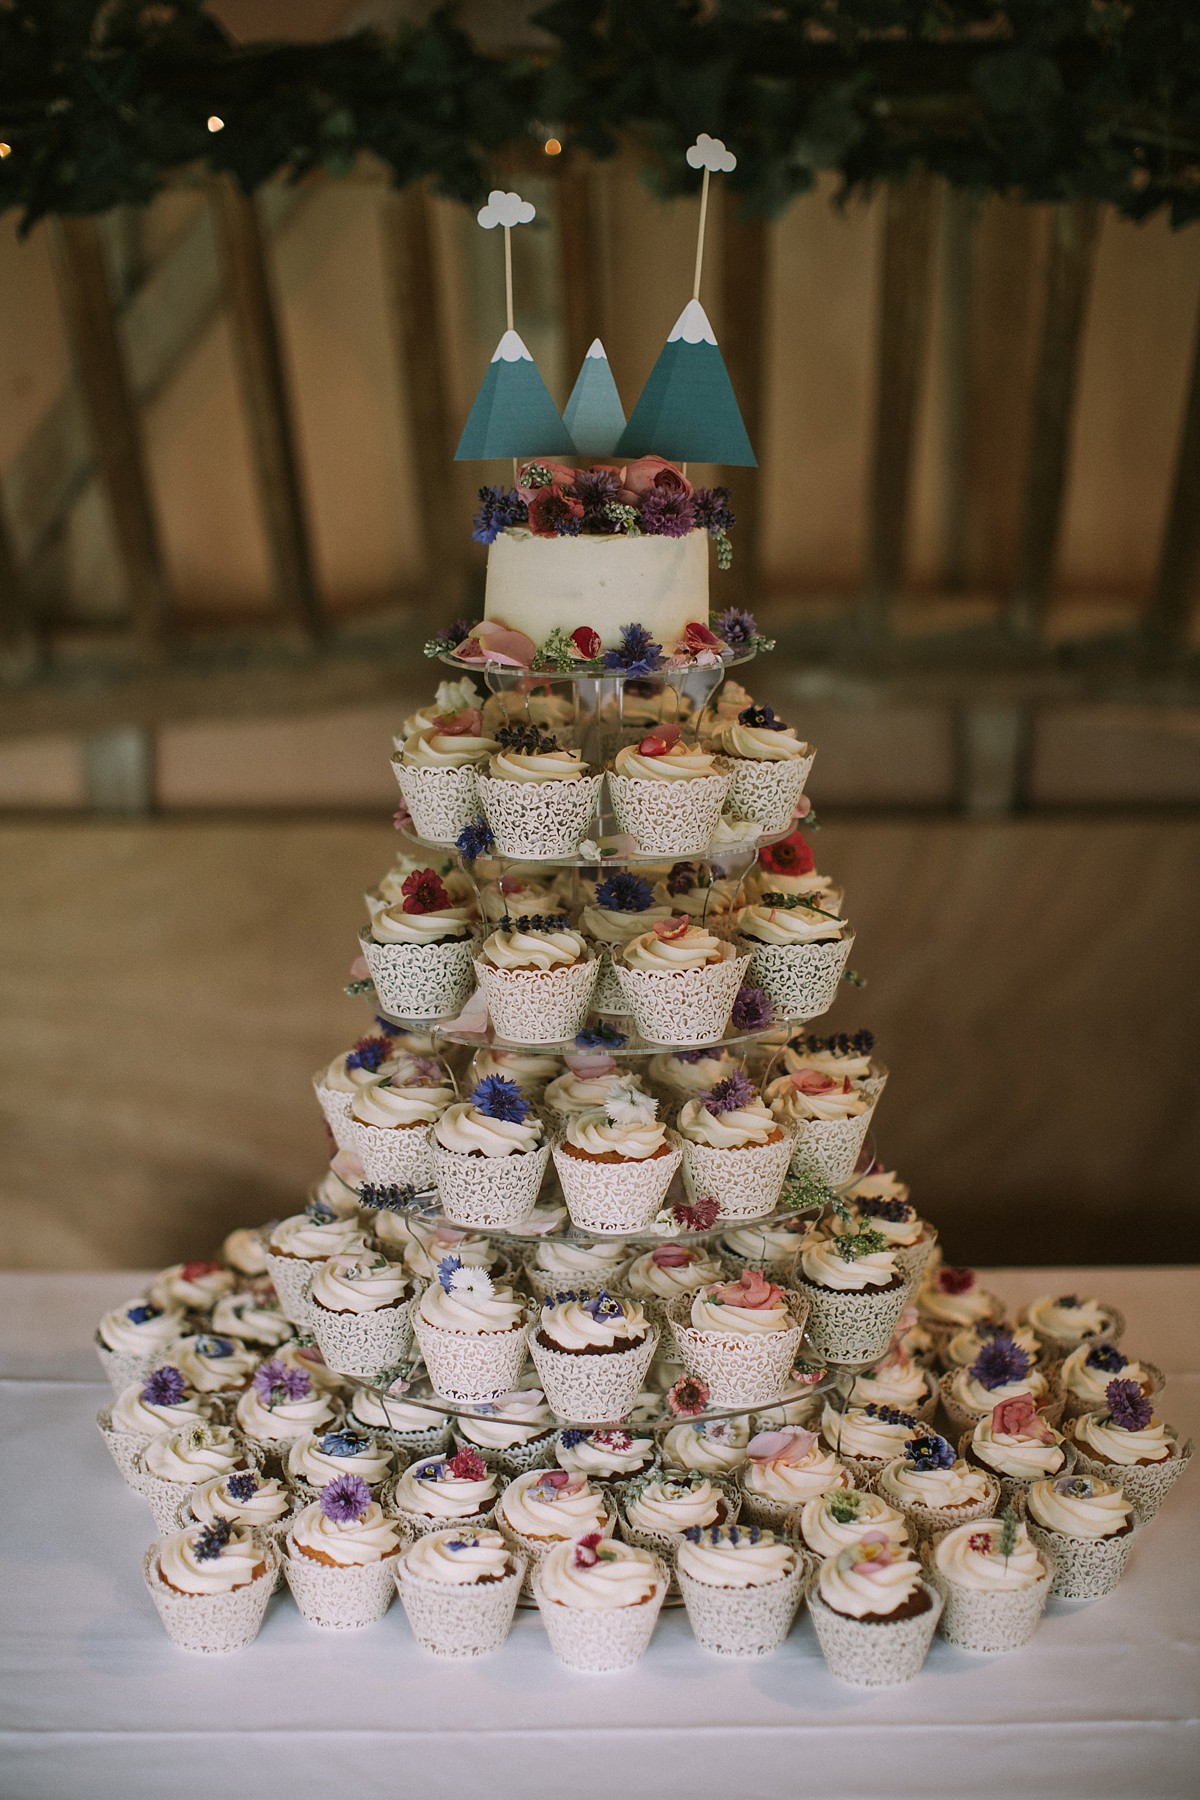 1920s Rembo Styling Rustic Barn Wedding Oxfordshire 7